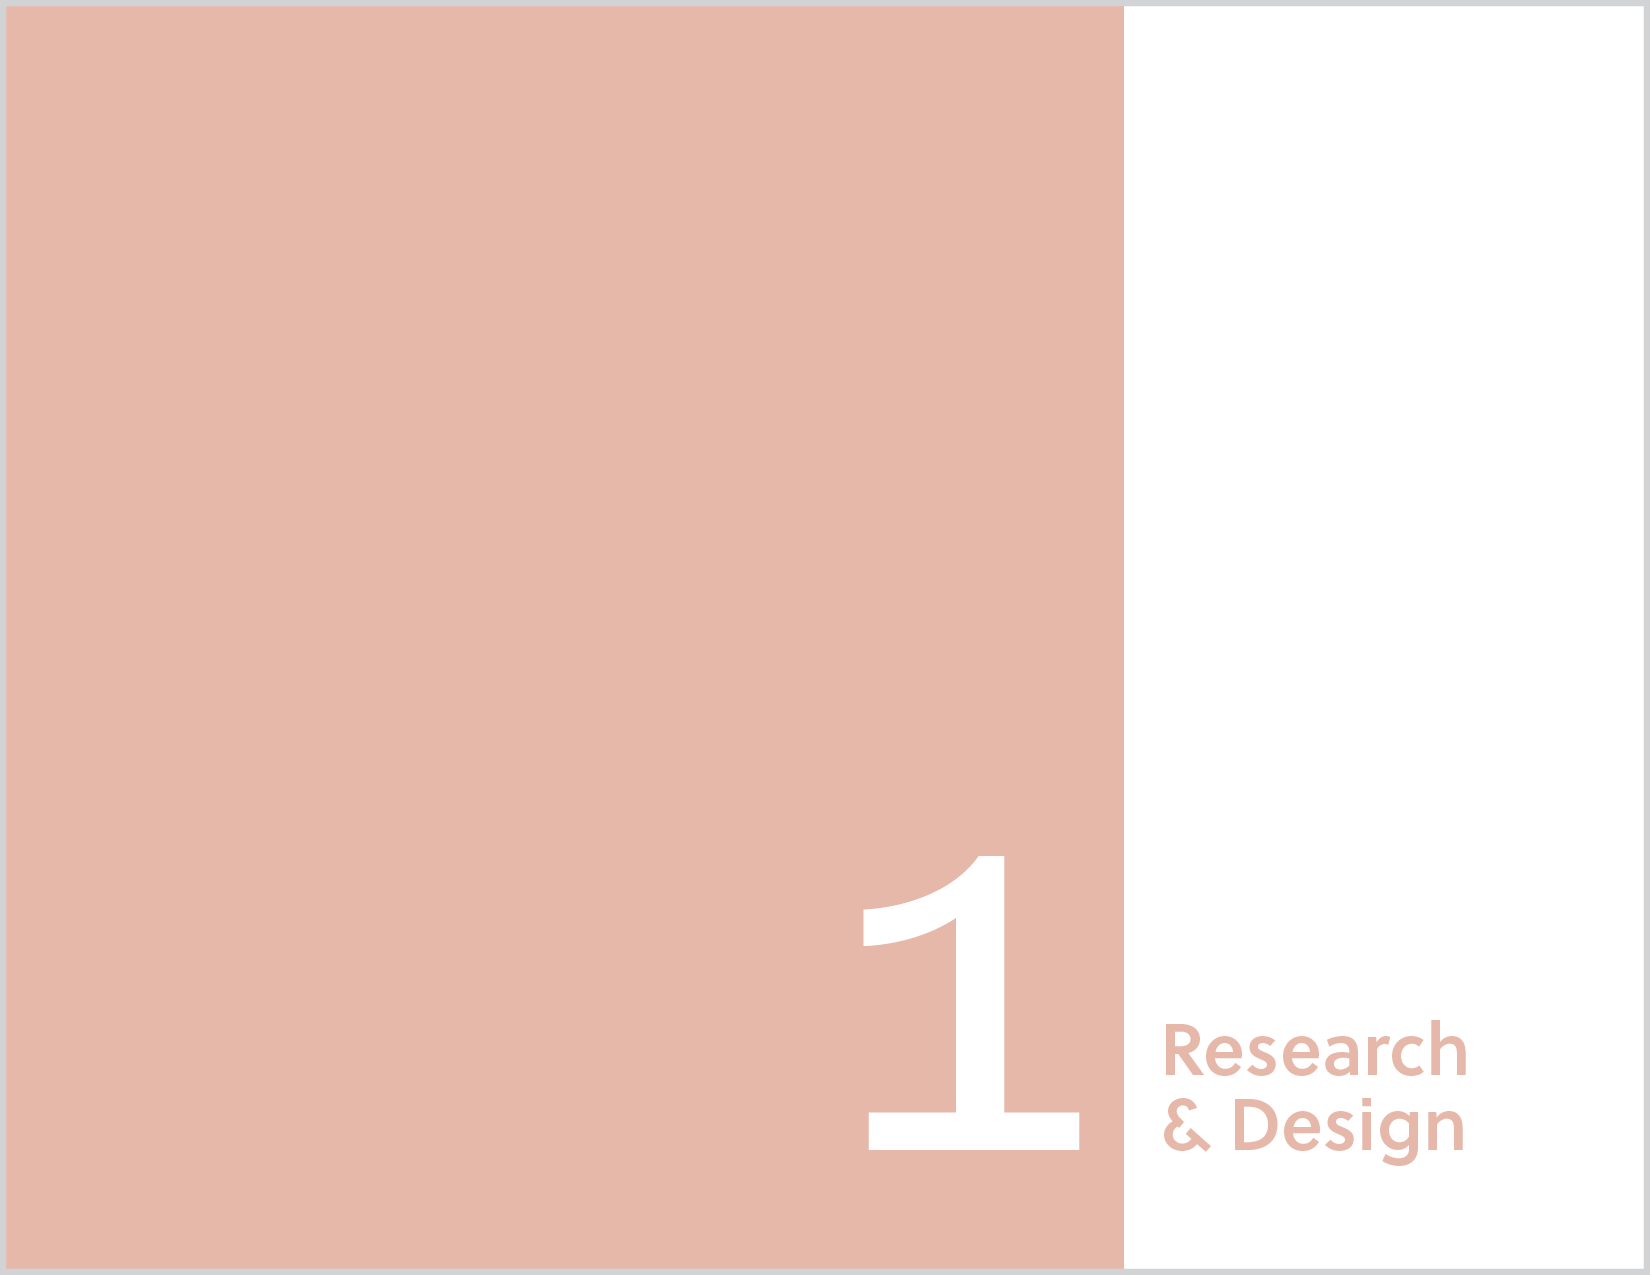 Process Book Section 1 Research and Design Divider